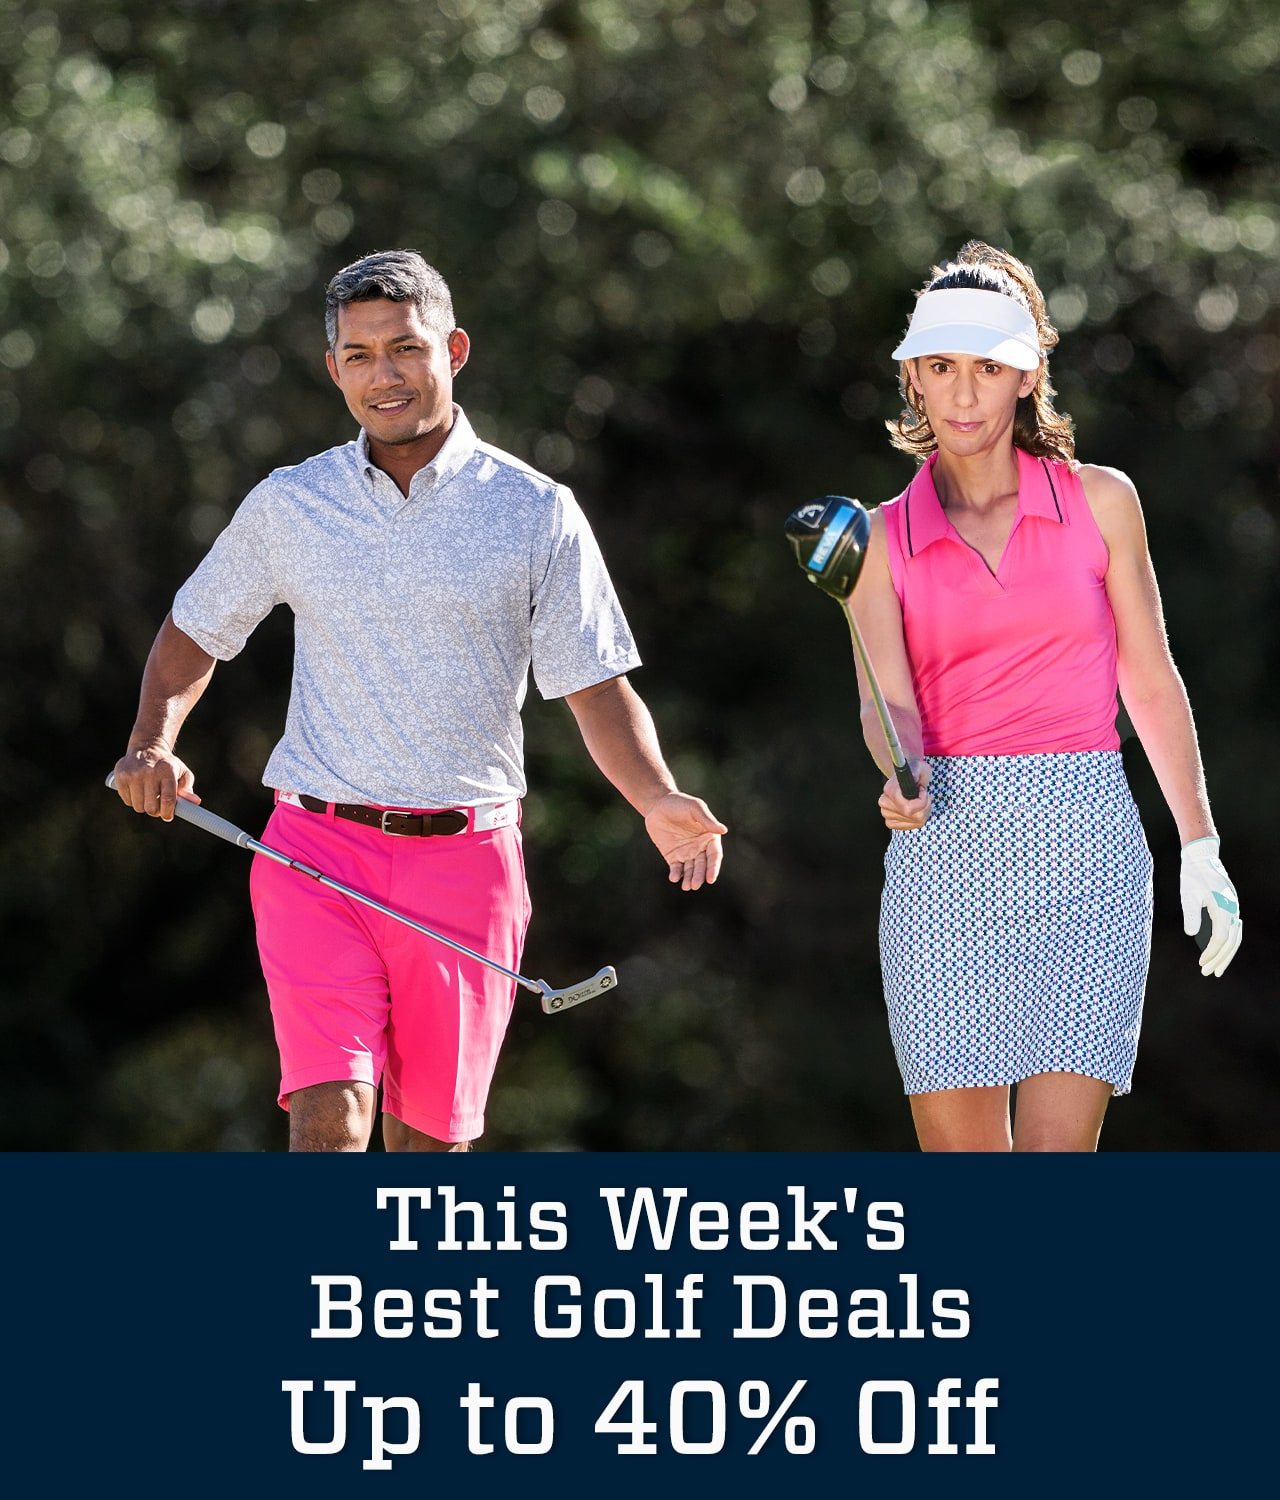 This week's best golf deals. Up to 40% Off.